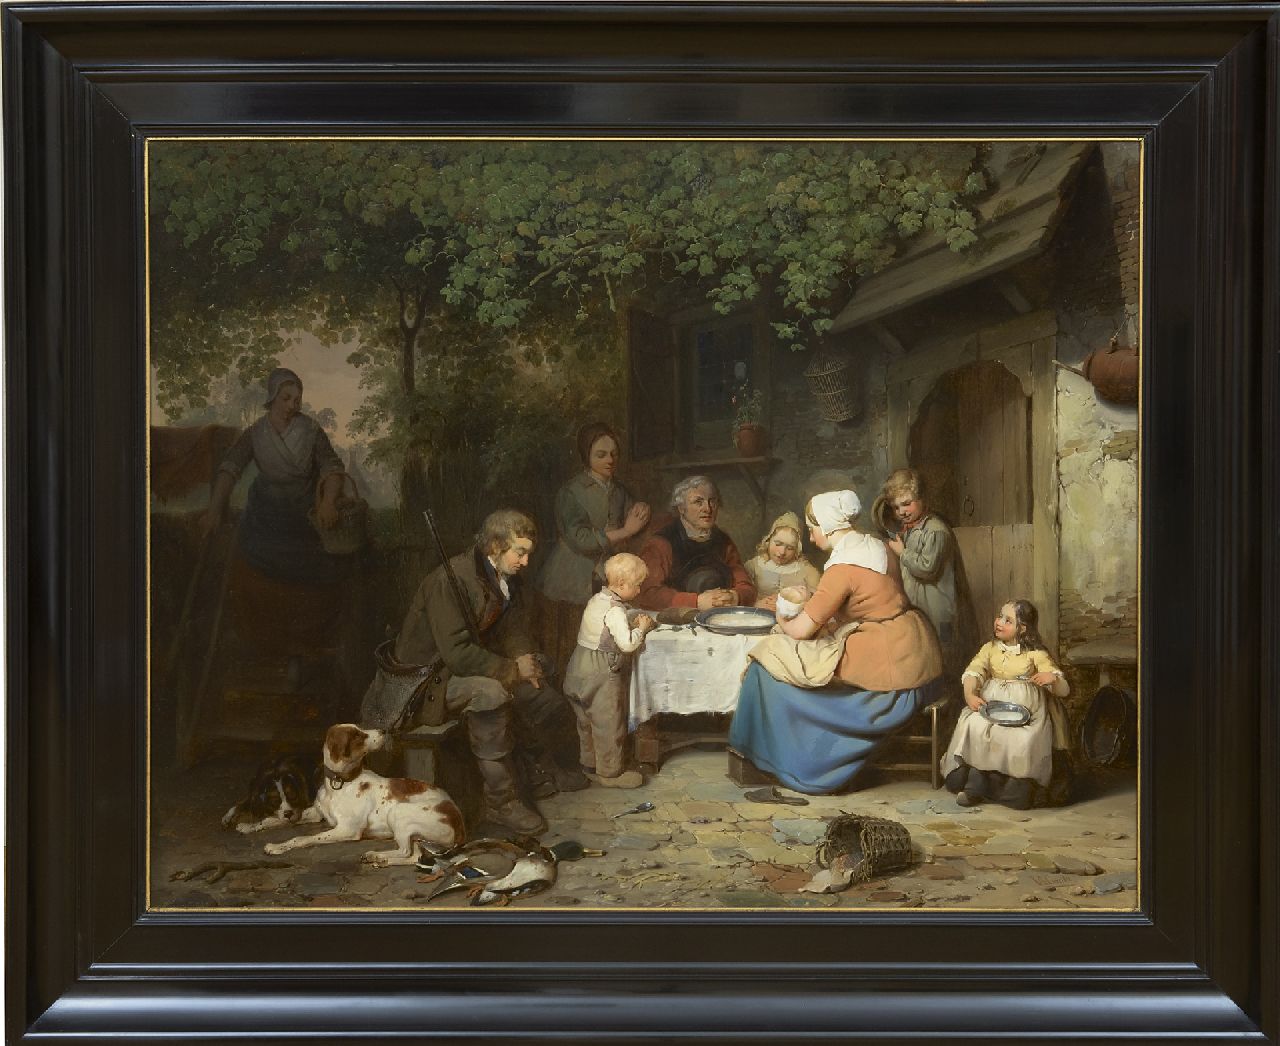 Canta J.A.  | Johannes Antonius Canta | Paintings offered for sale | Praying before the meal, oil on panel 63.9 x 82.5 cm, signed l.r.